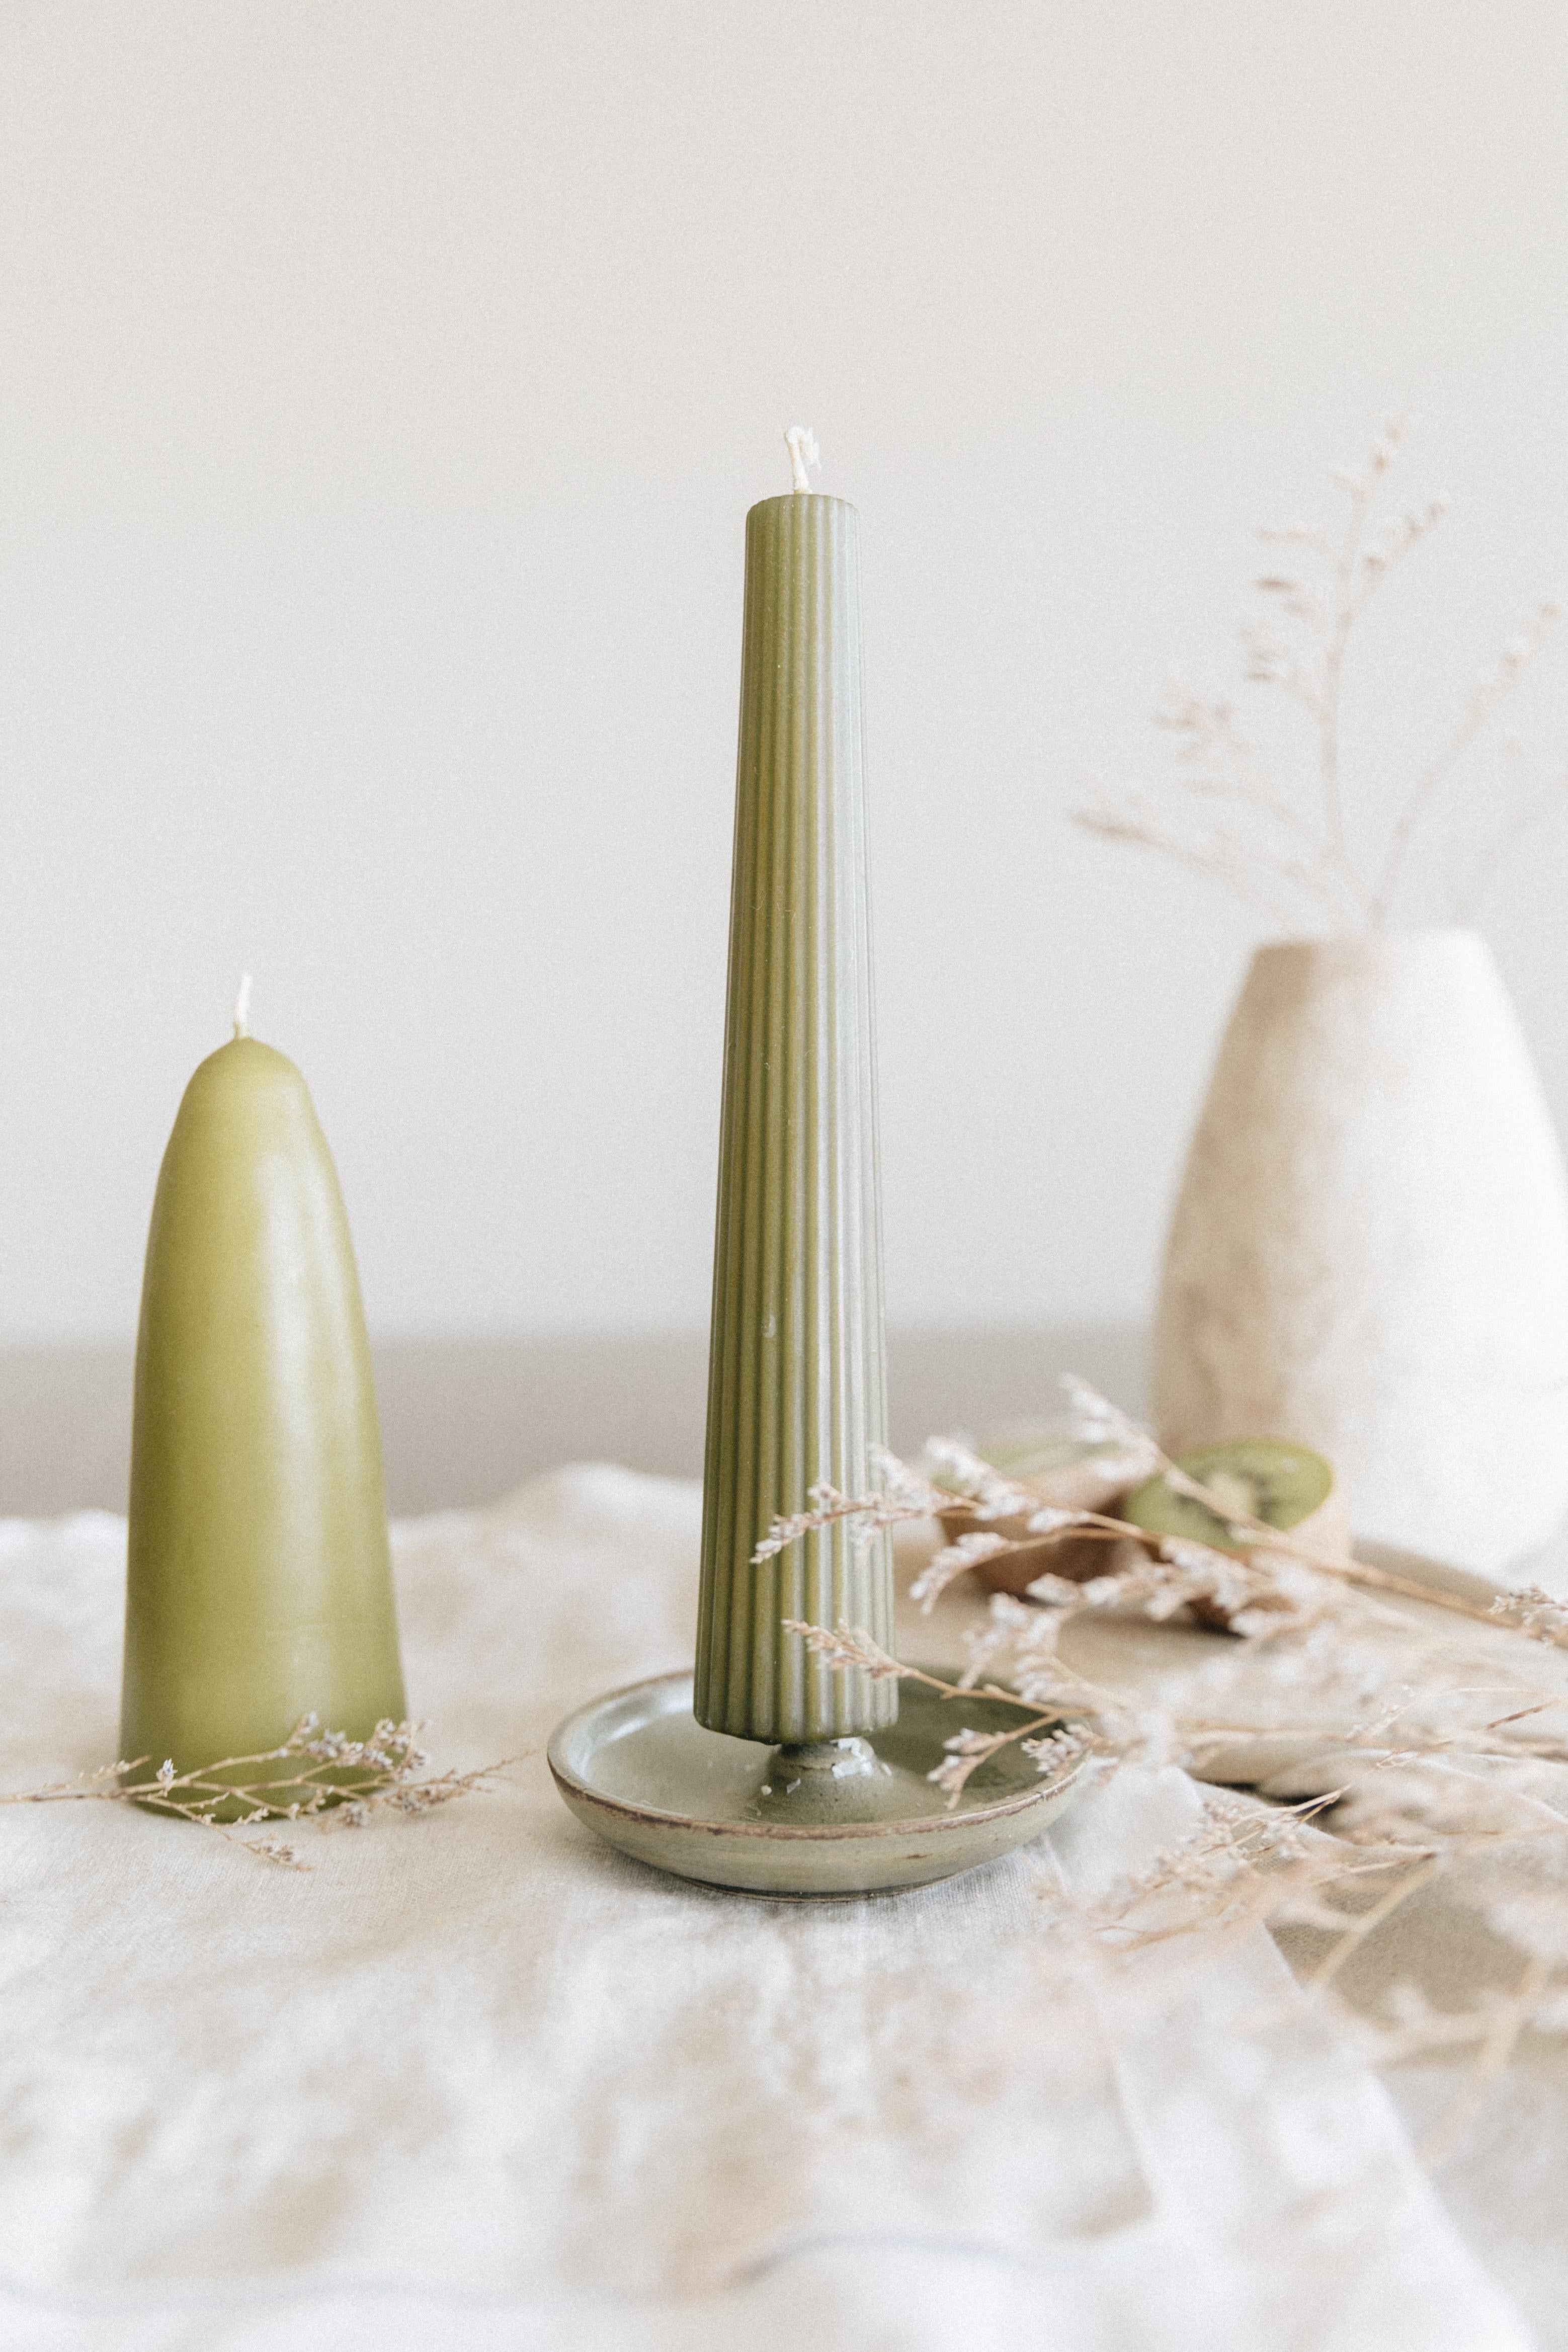 
Introducing our handcrafted ceramic candle holder, meticulously crafted by skilled artisans in Puebla, Mexico. Each piece is made from high-temperature baked ceramic and hand painted. Designed with practicality in mind, our candle holder features a